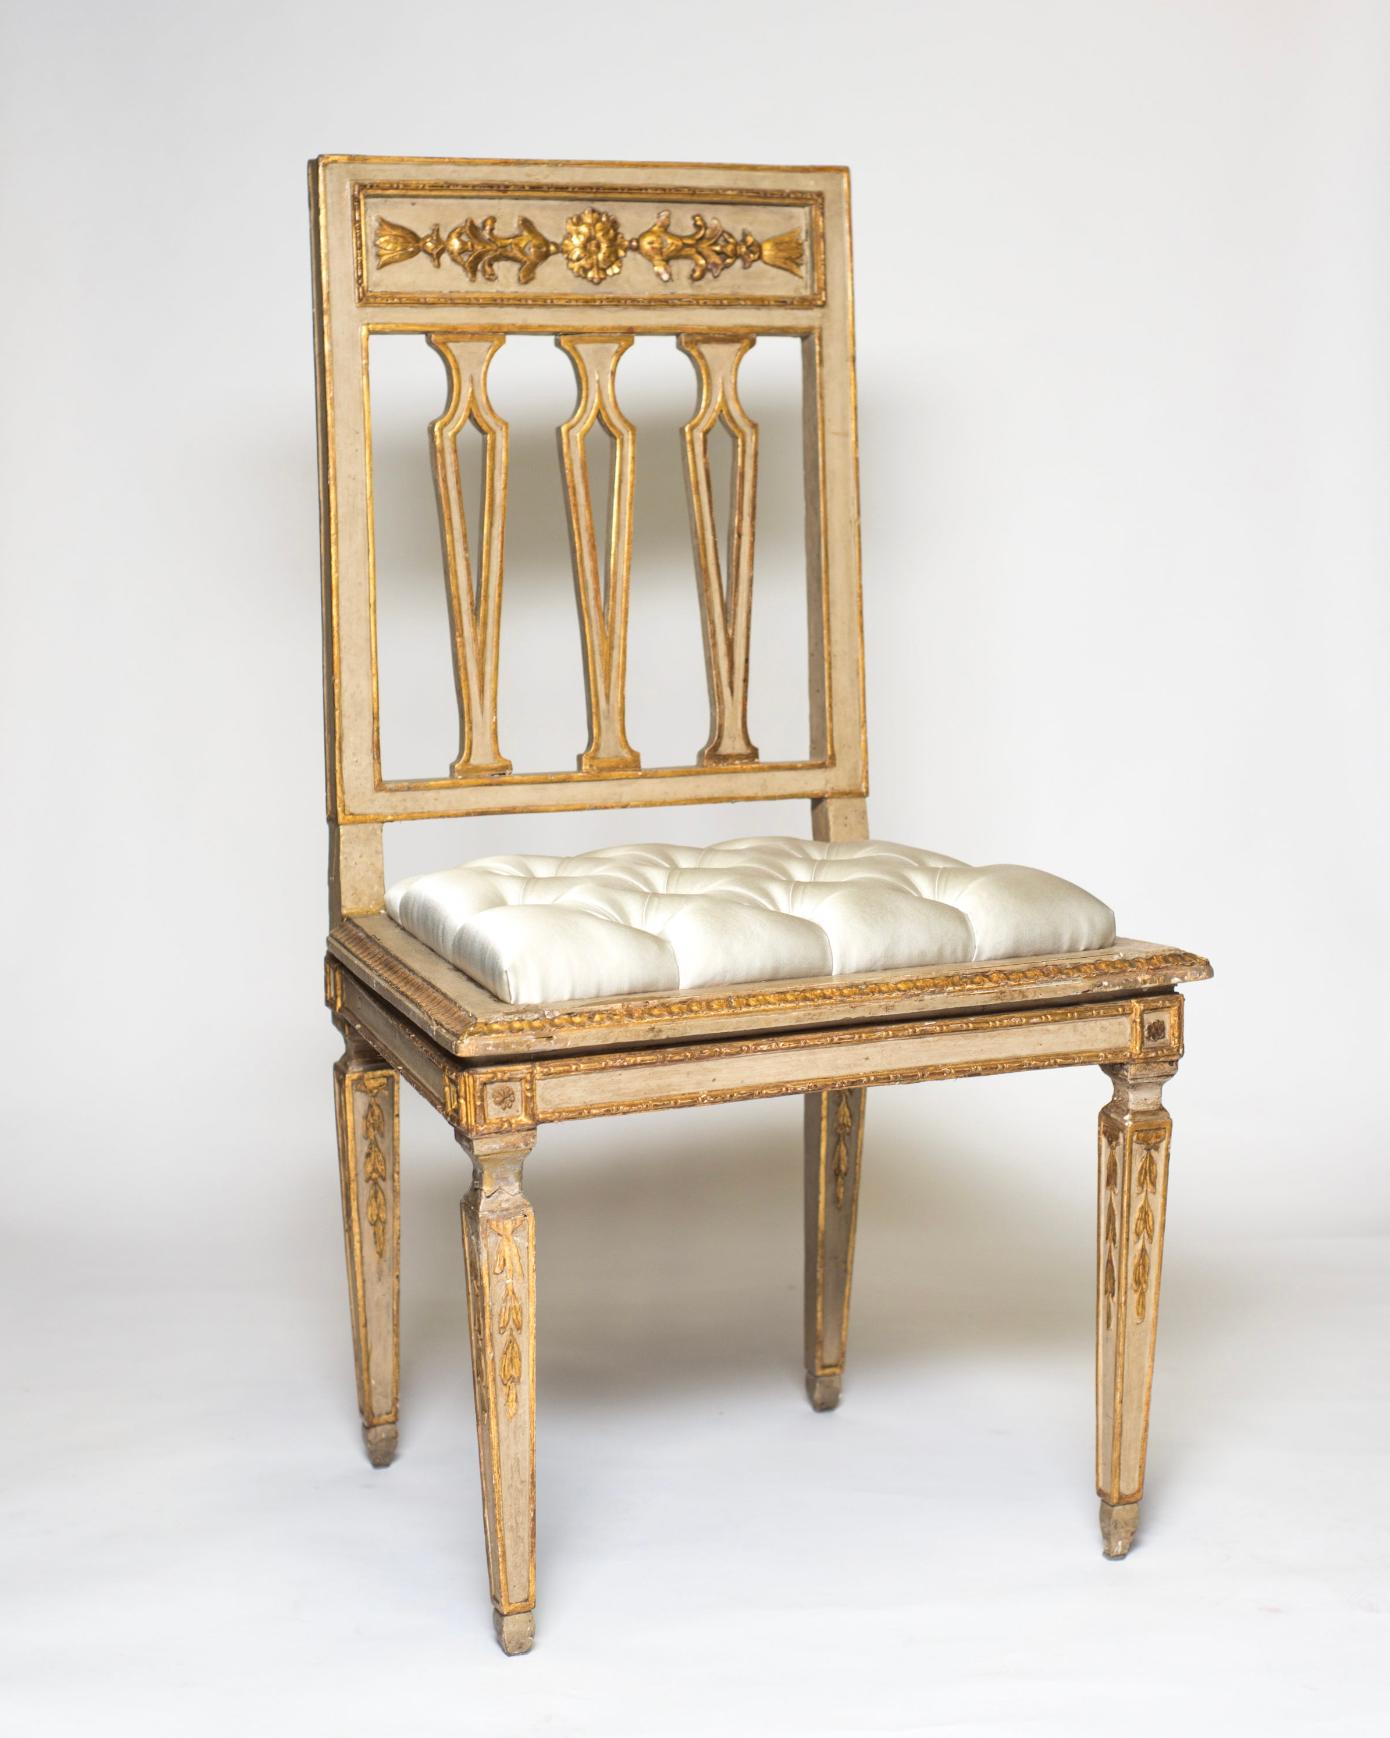 A set of four antique Florentine chairs with ornate carving and reupholstered in silver silk satin with a tufted design.